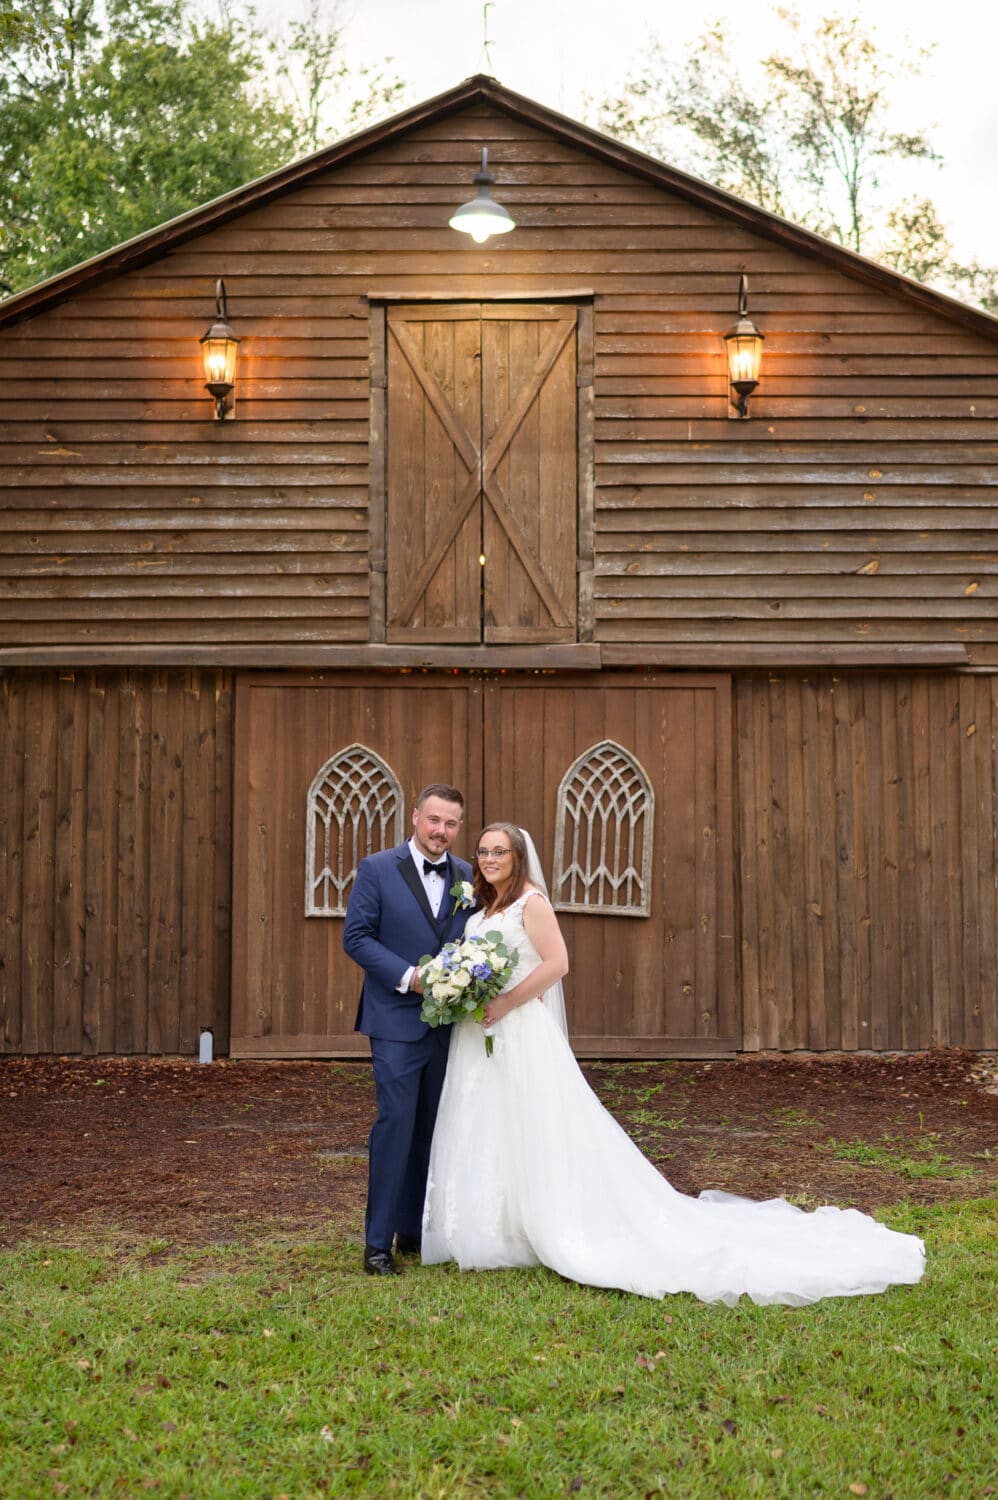 Portrait of bride and groom by the barn reception area - Wildhorse at Parker Farms